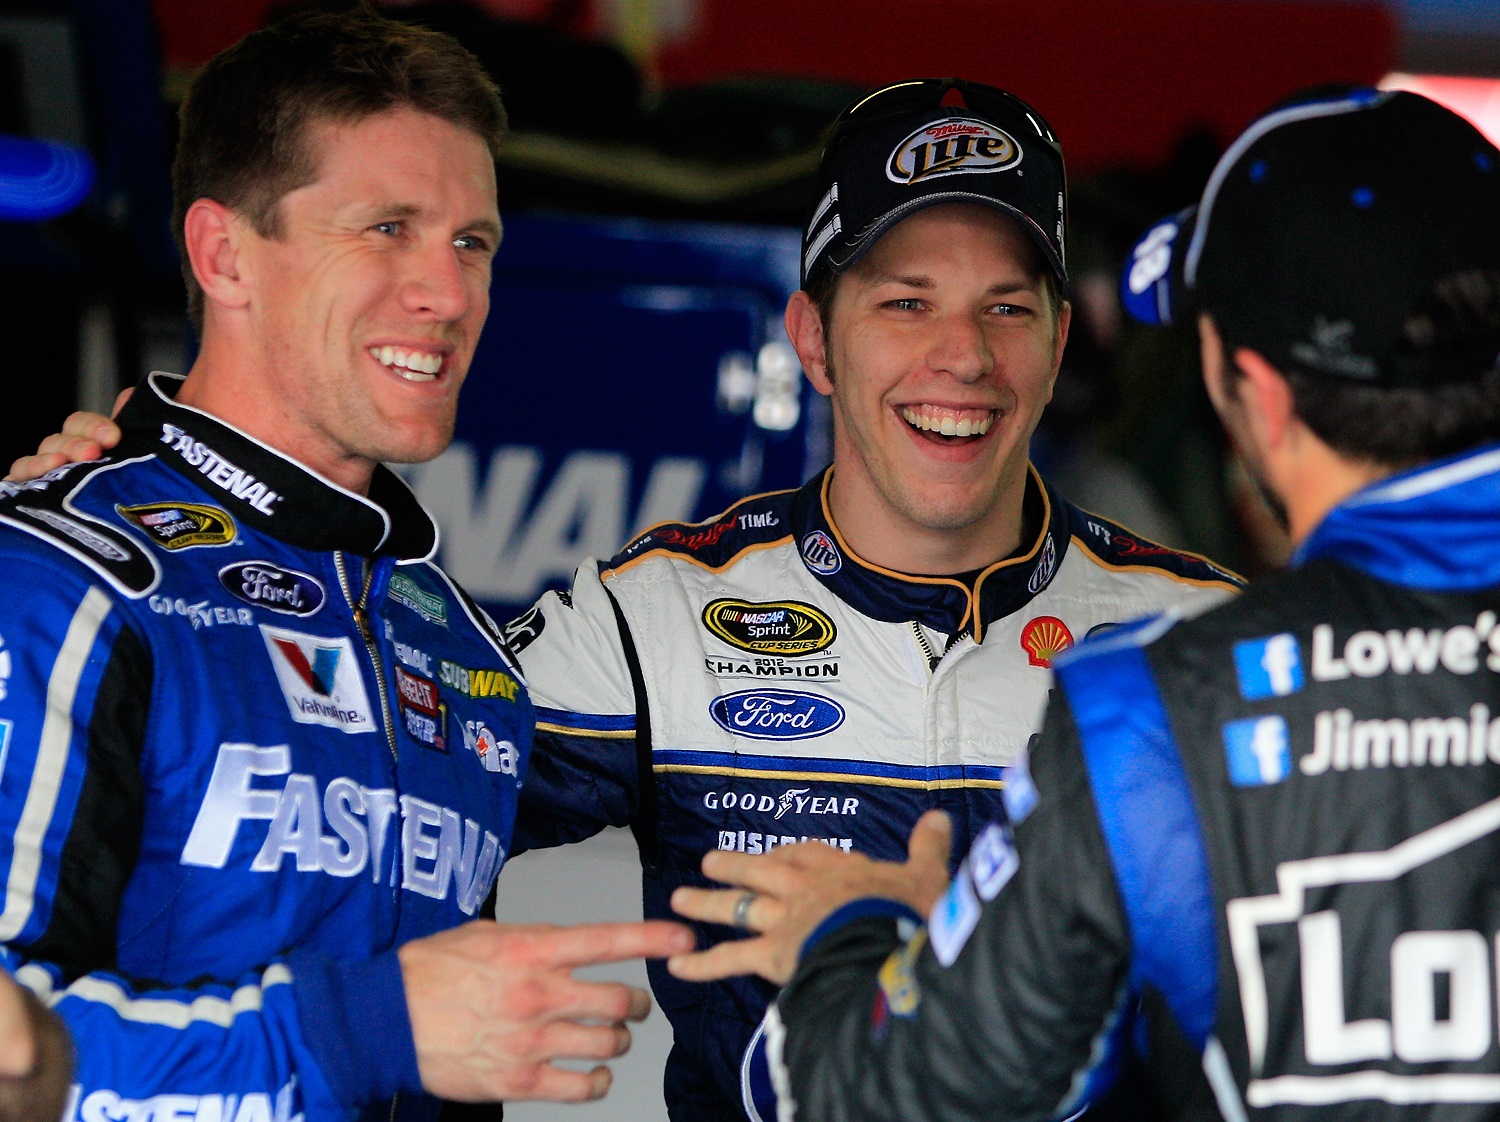 Carl Edwards and Brad Keselowski were cordial at the 2013 AAron's 499 four years after their feud started there.